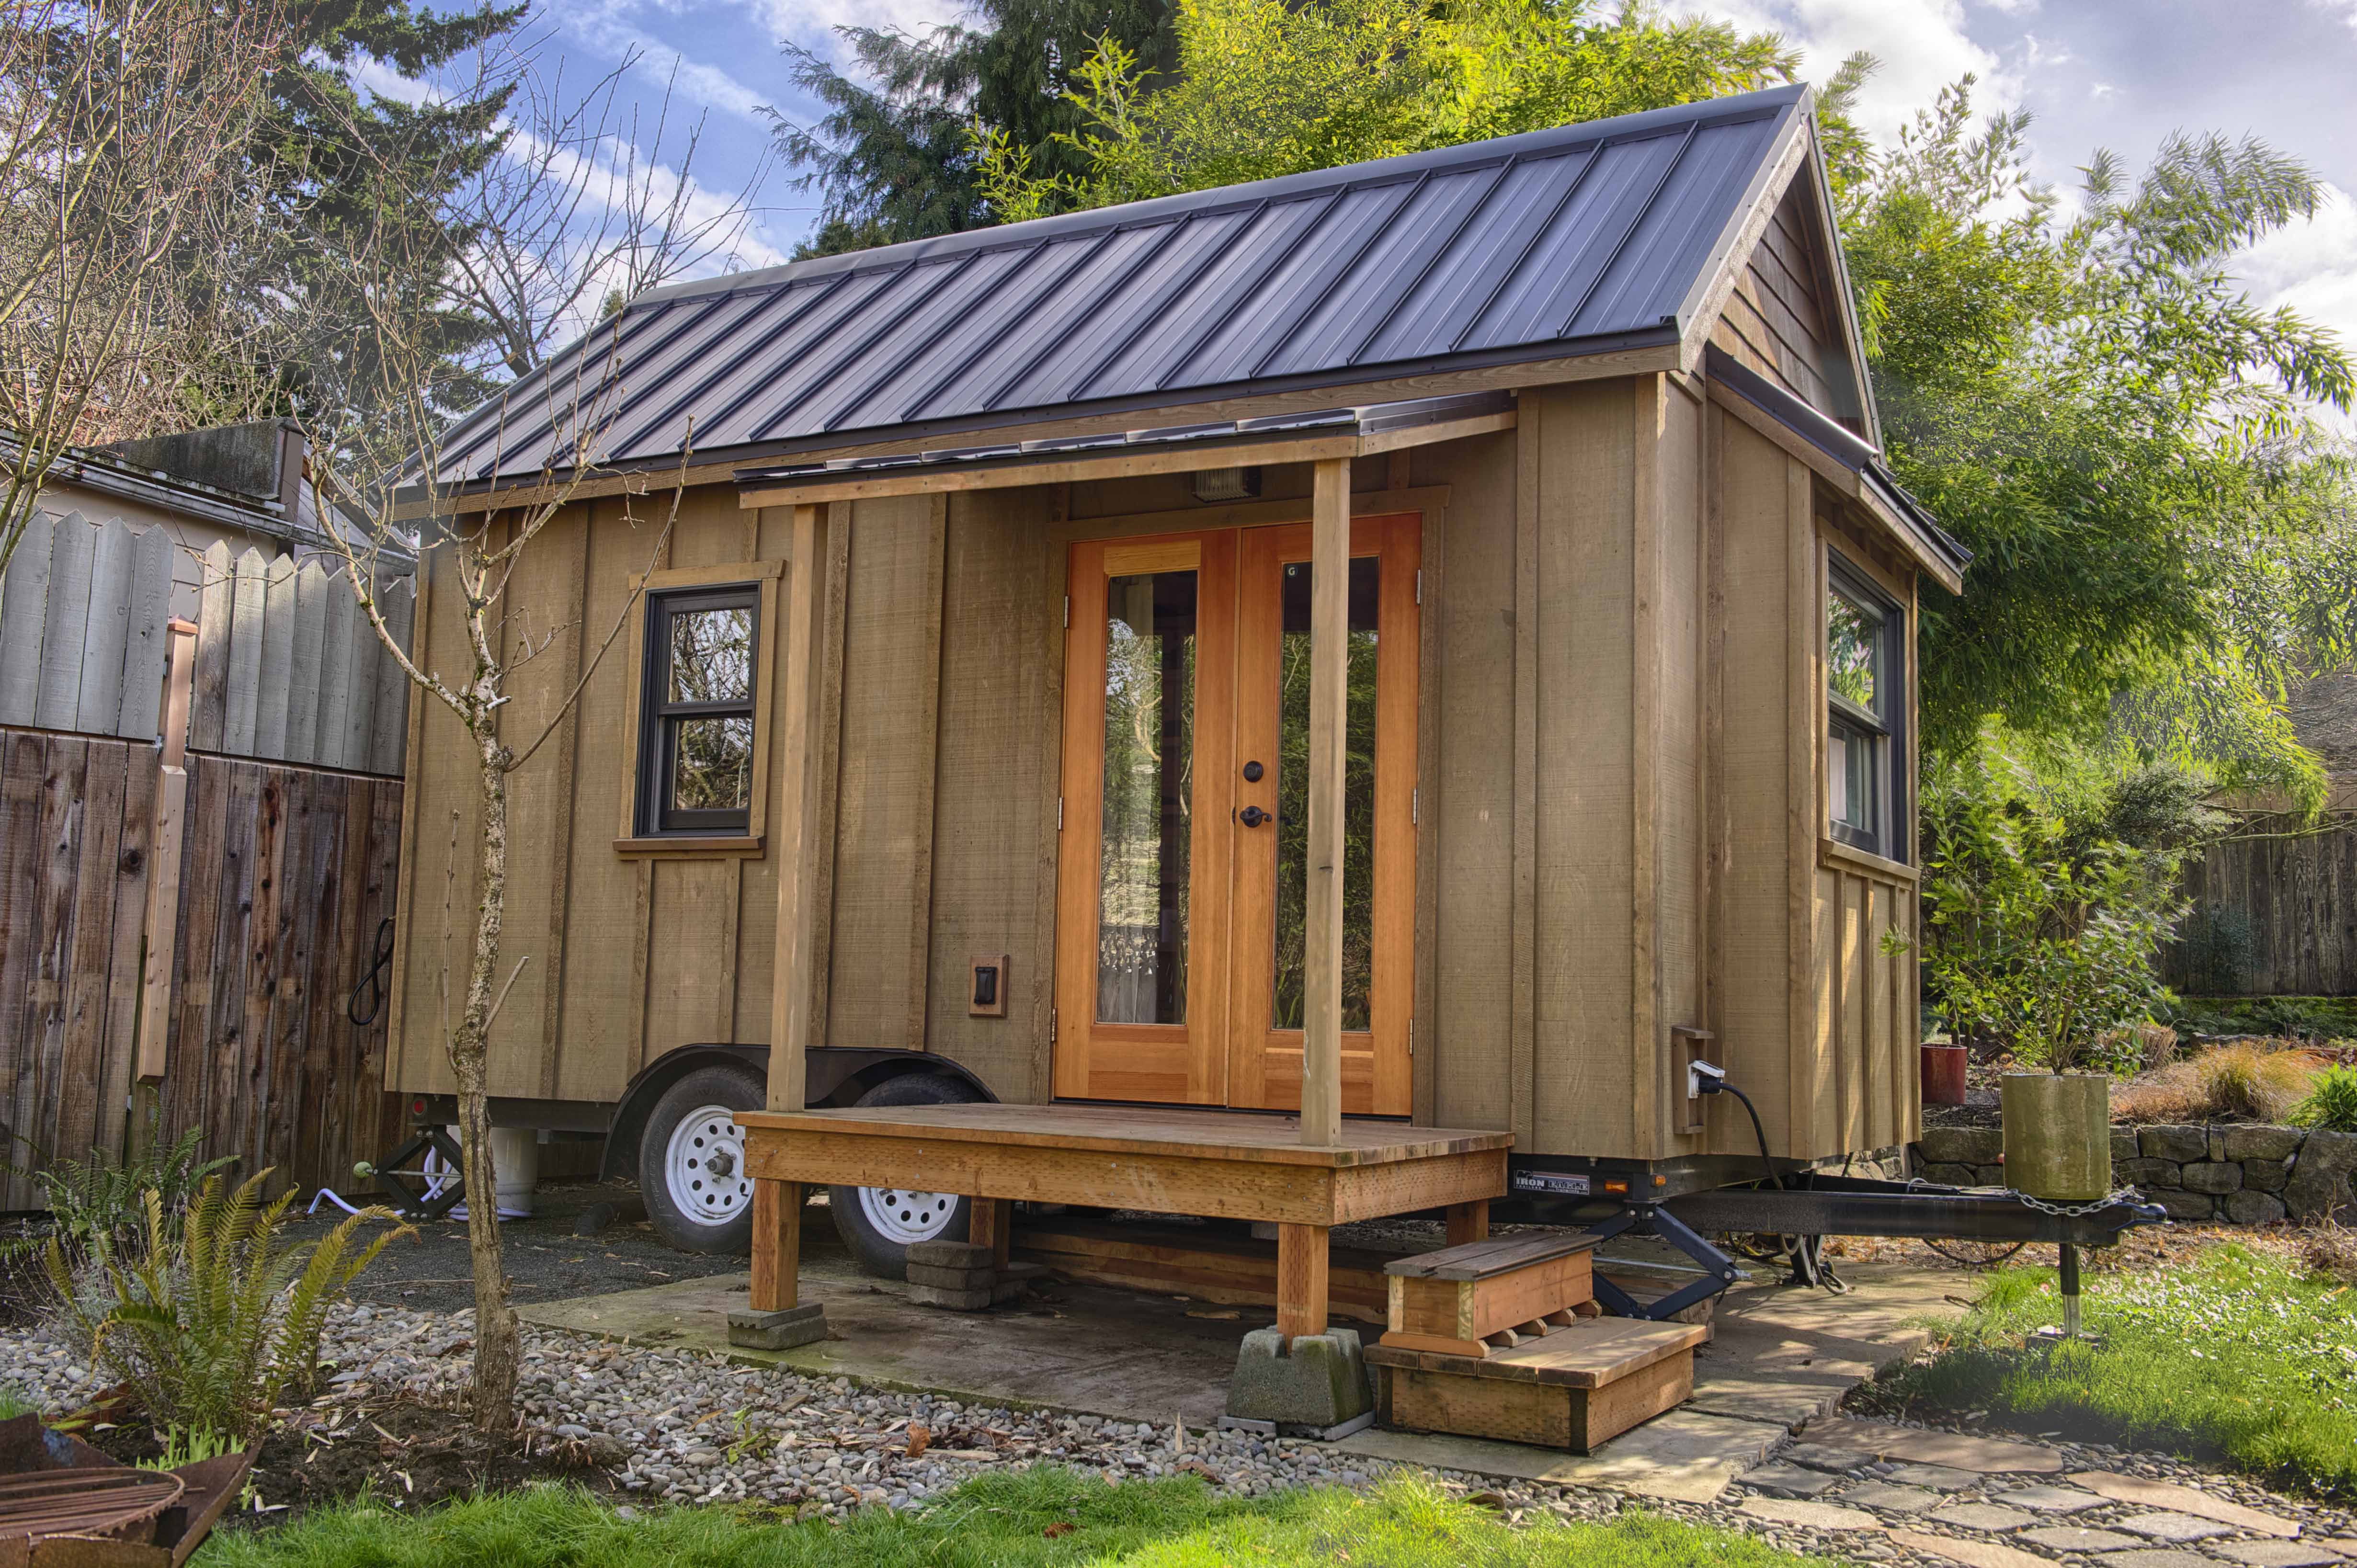 The Sweet Pea Tiny House Plans Padtinyhouses Com,Weeping Willow Leaves